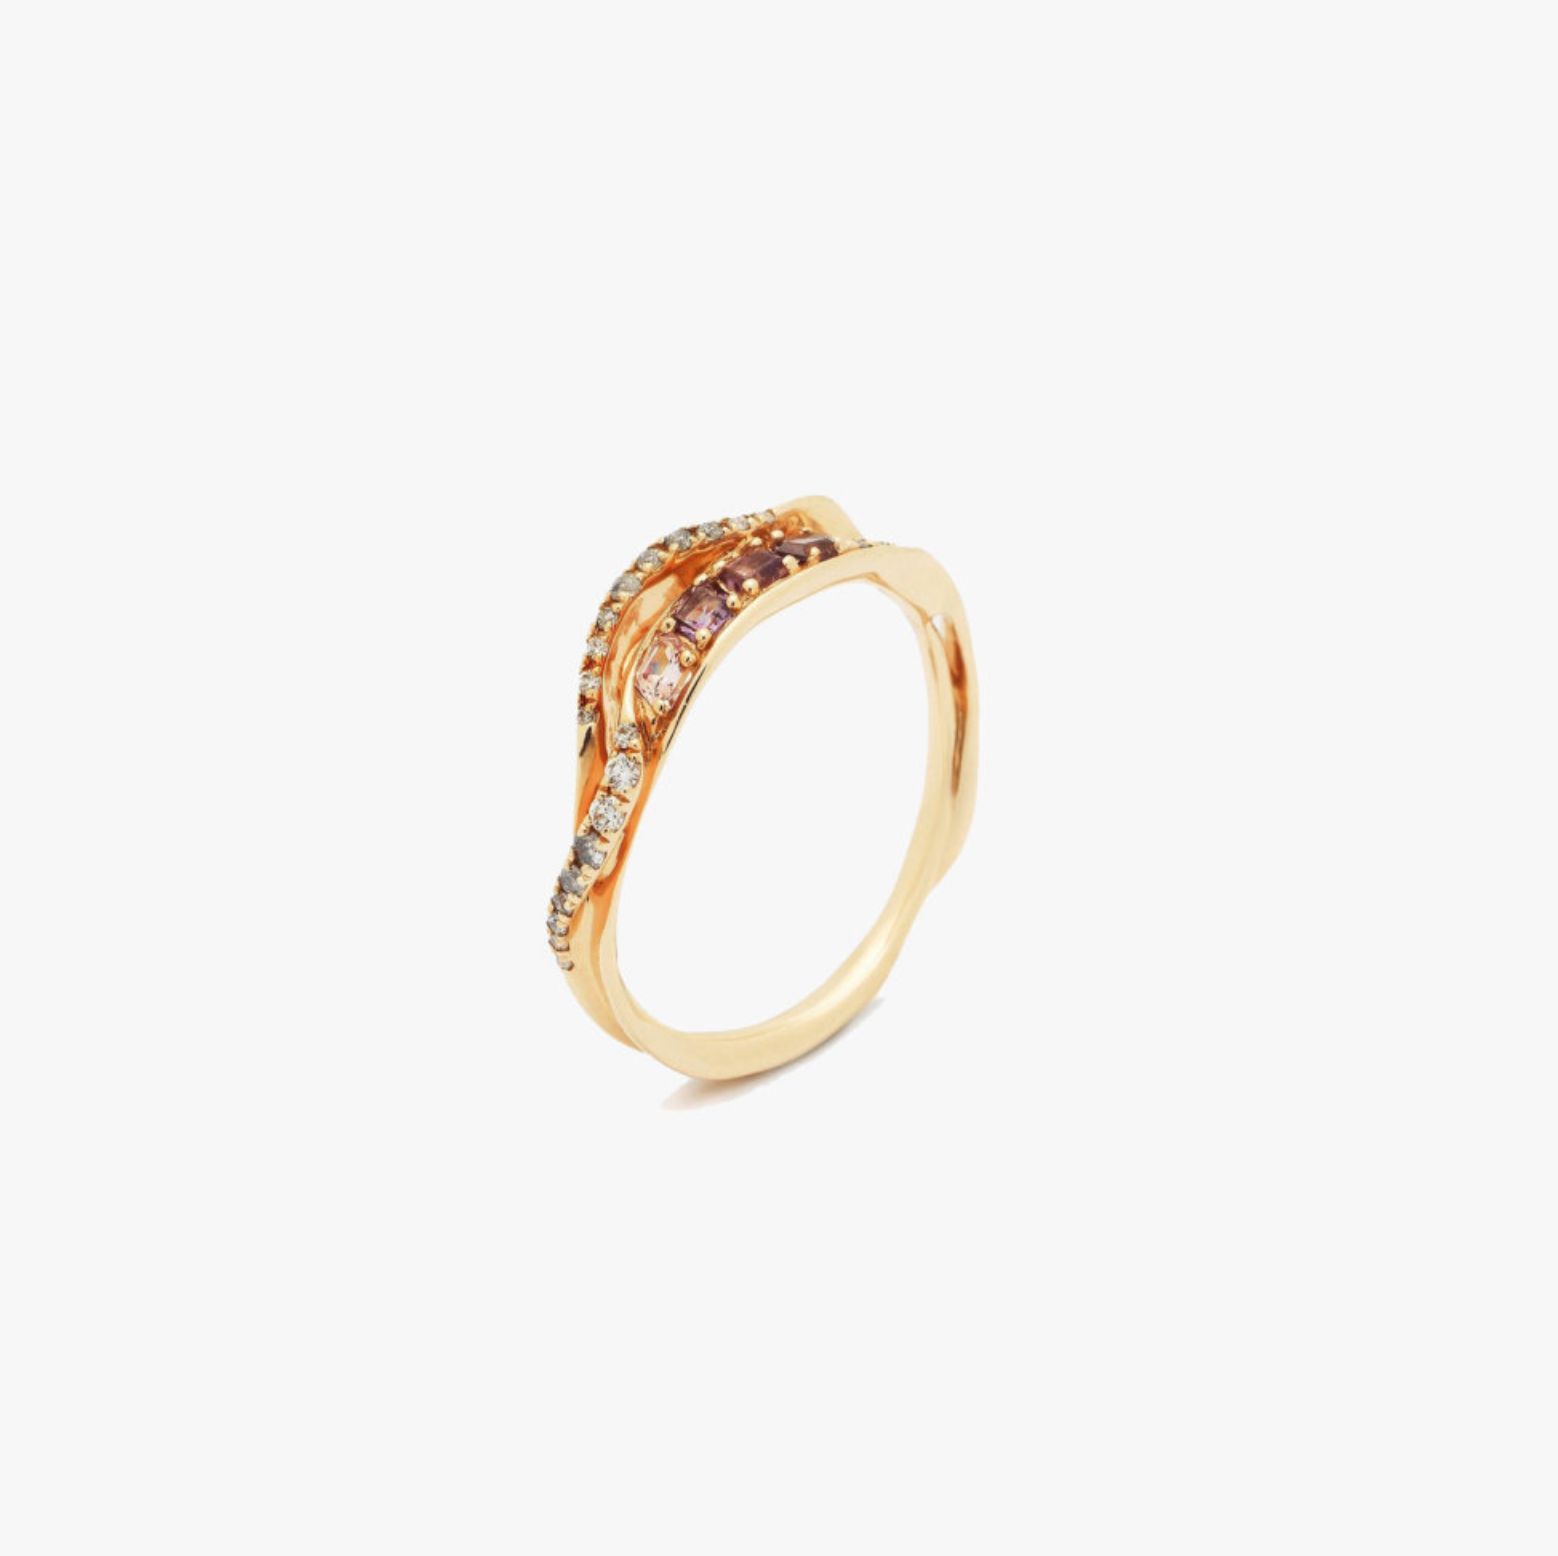 Inhale violet stackable ring in yellow gold with diamonds and spinel